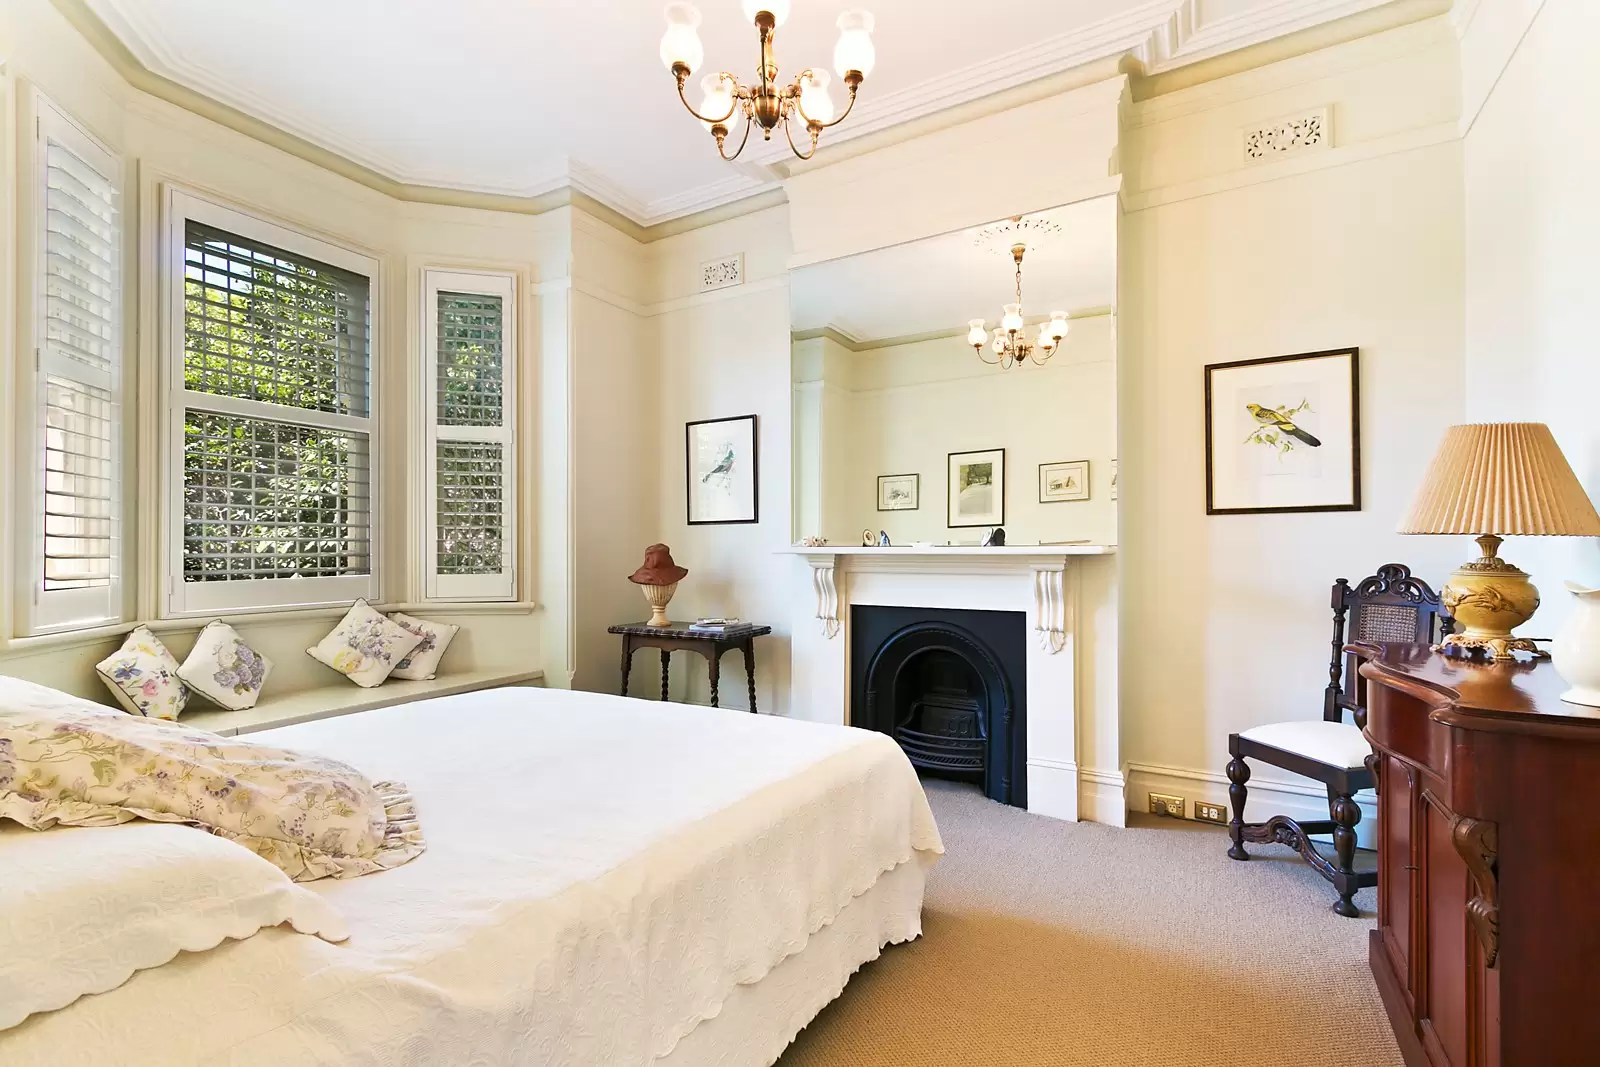 Photo #7: 14 Nelson Street, Woollahra - Sold by Sydney Sotheby's International Realty